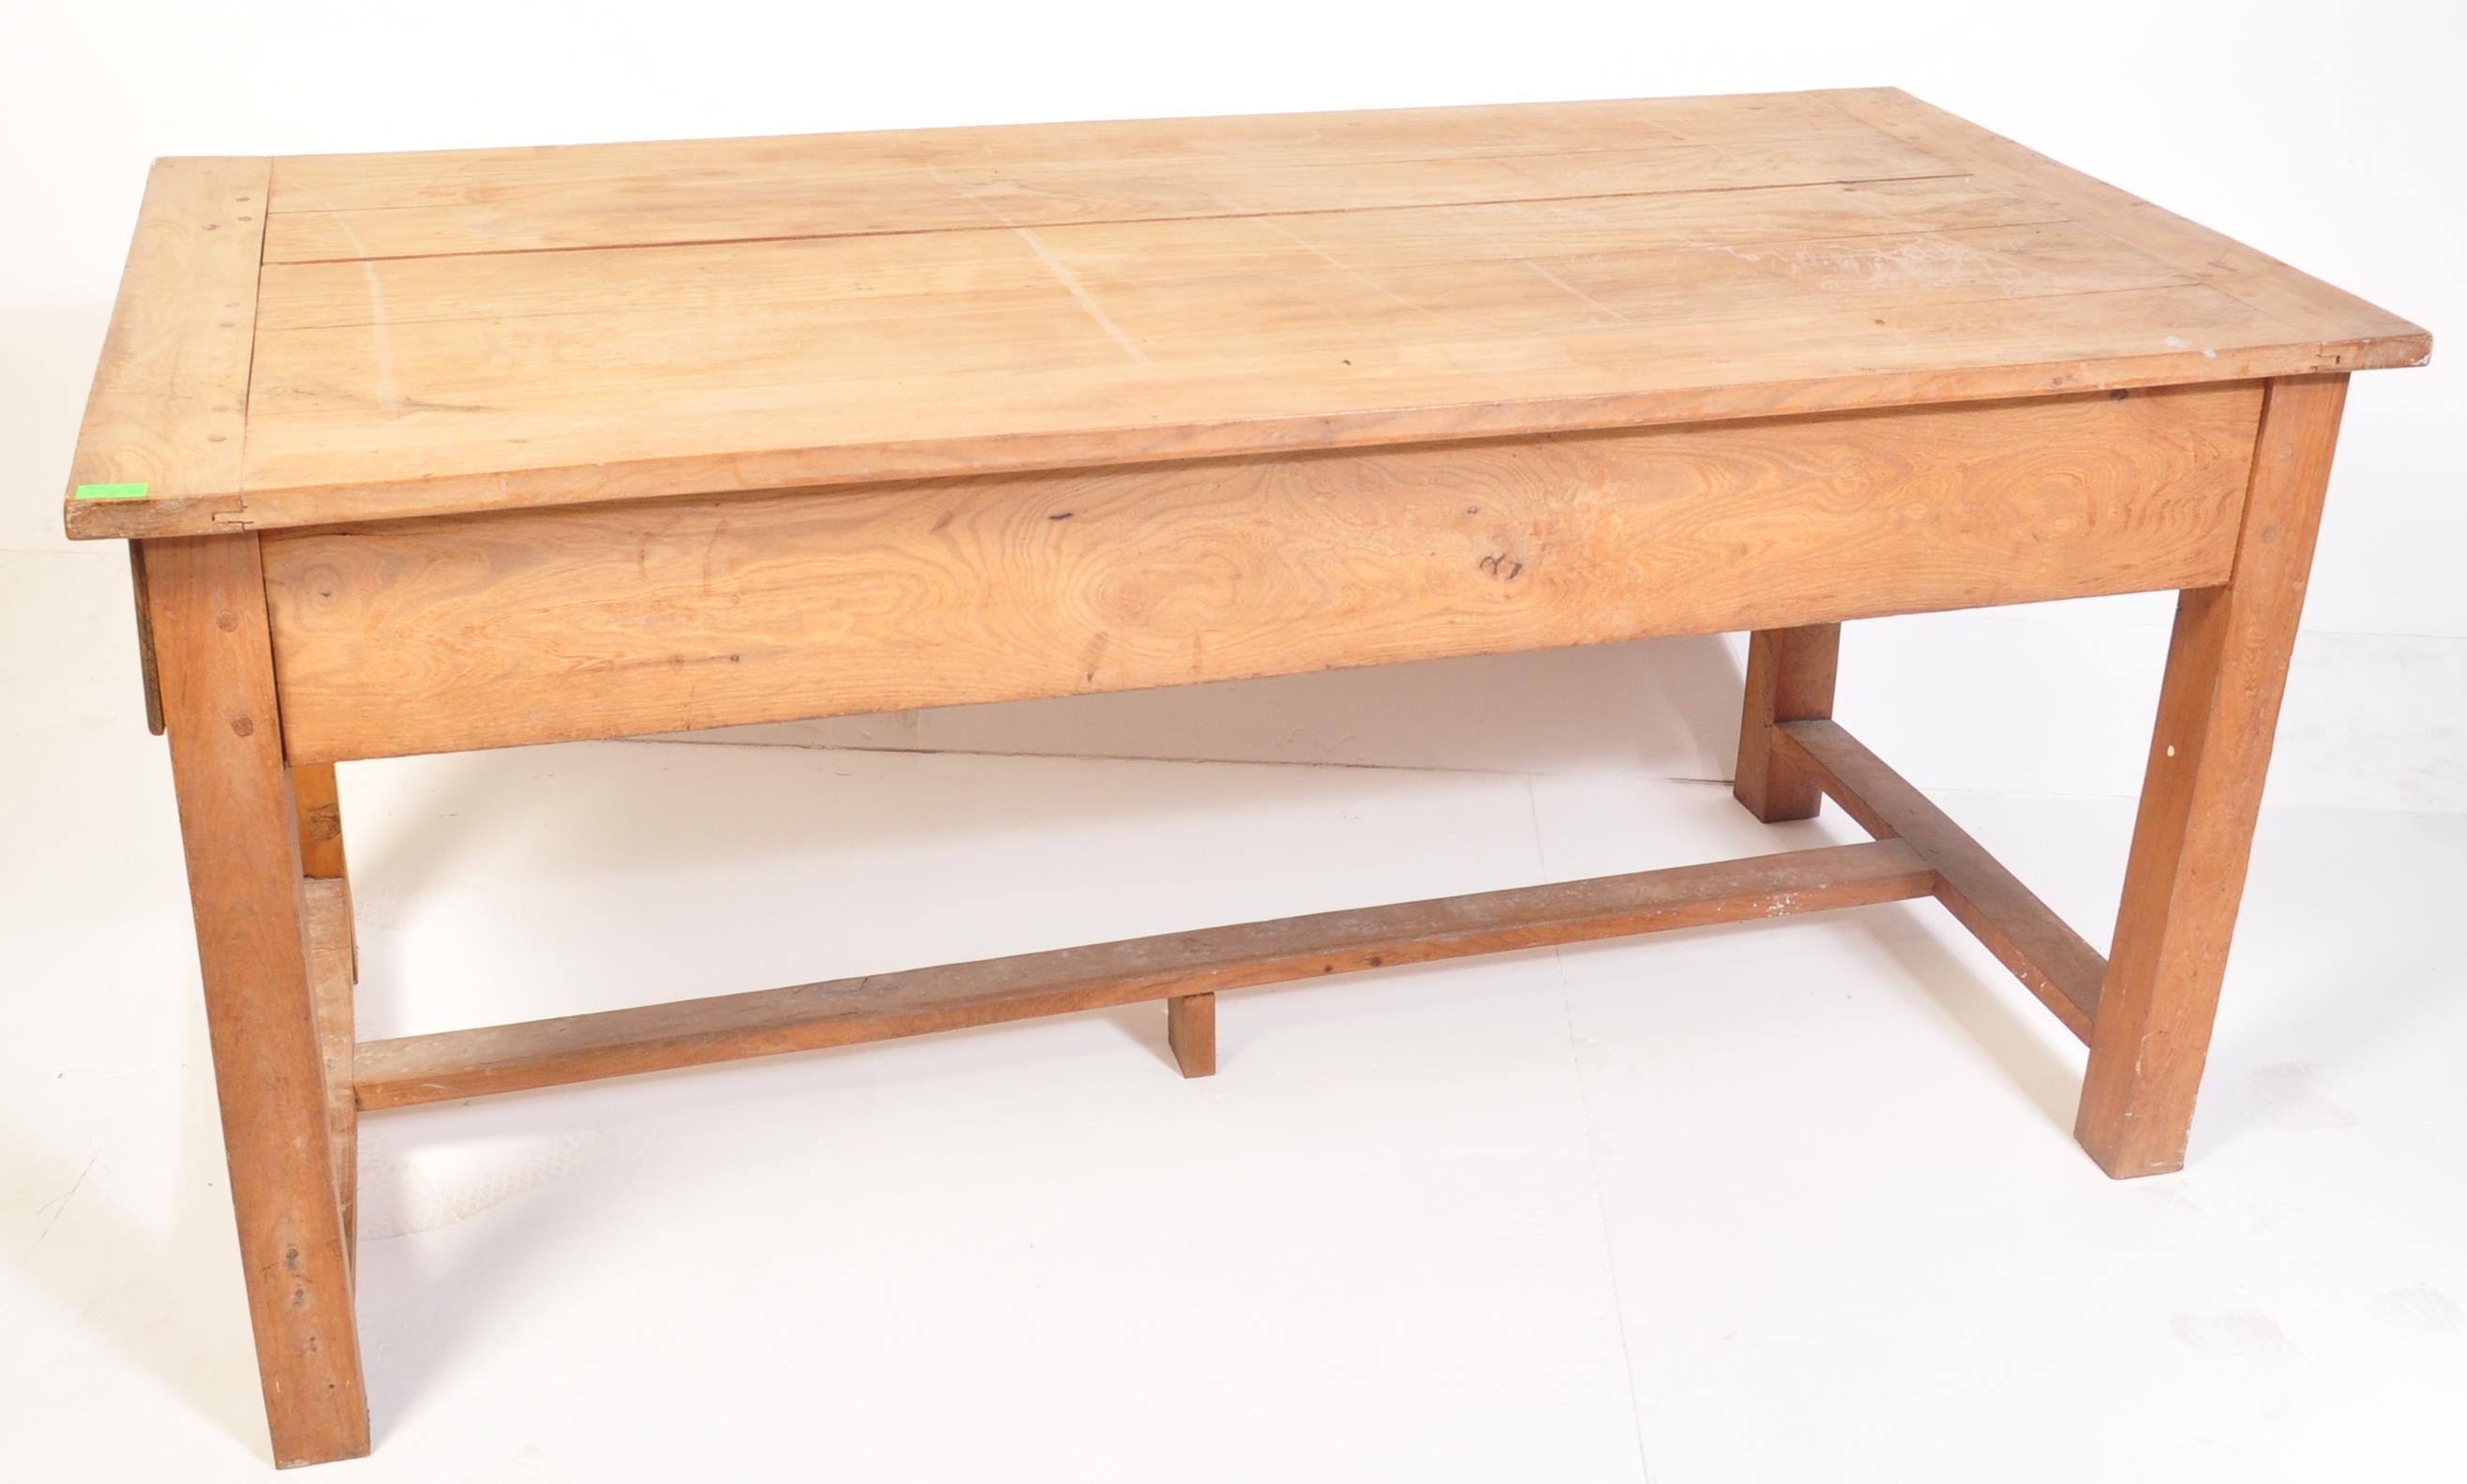 LATE 19TH CENTURY FRENCH CHERRY WOOD FARMHOUSE TABLE - Image 2 of 6